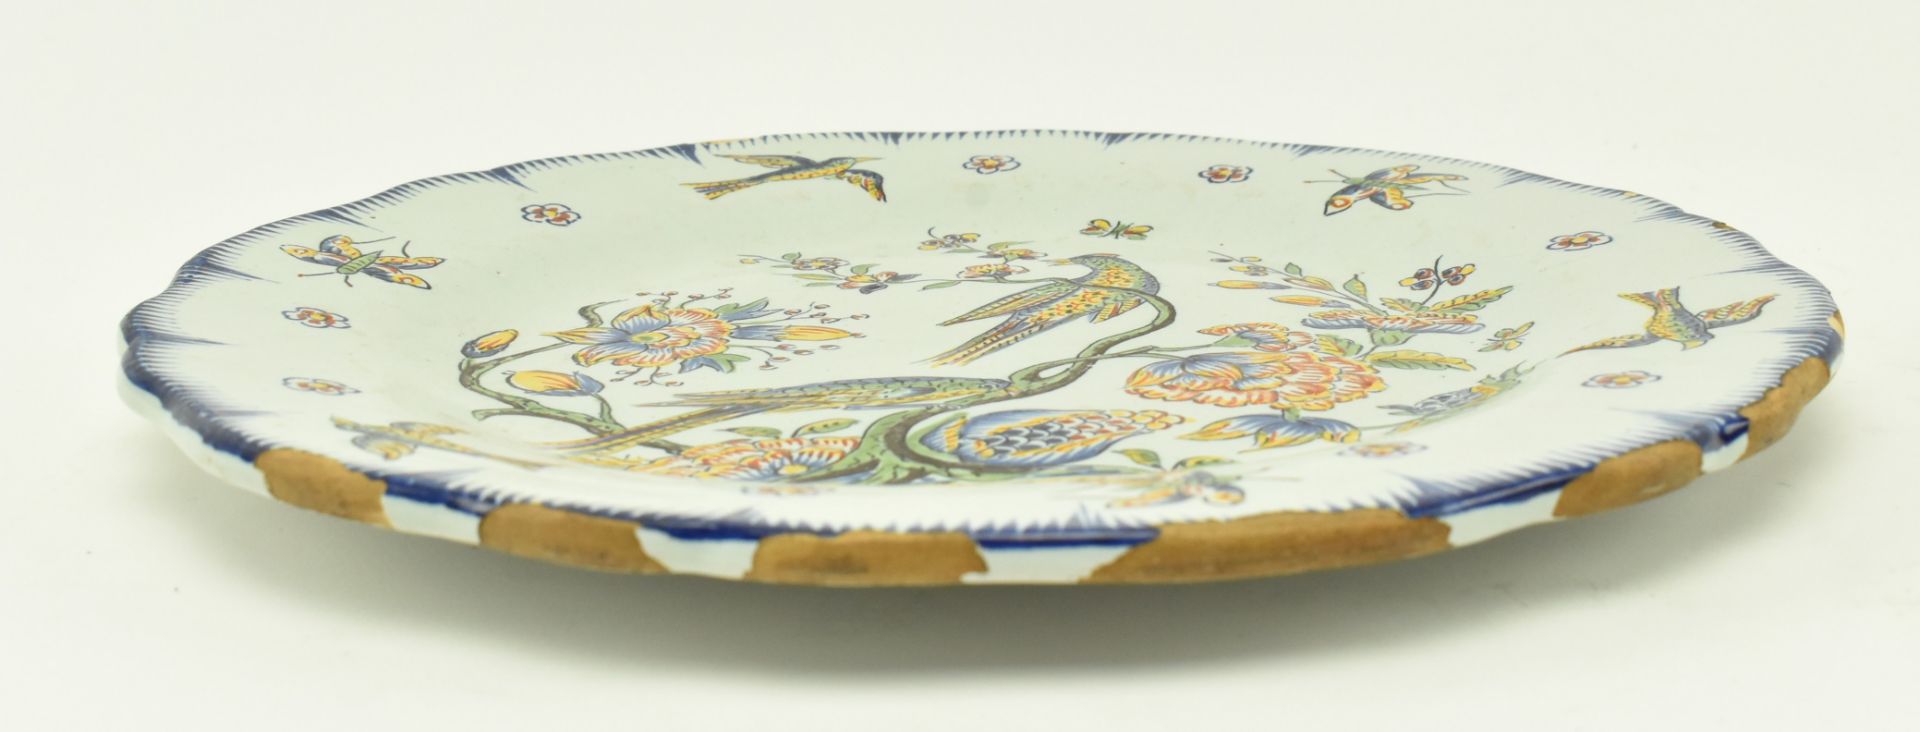 18TH CENTURY CONTINENTAL DELFT POLYCHROME TIN GLAZED PLATE - Image 5 of 7